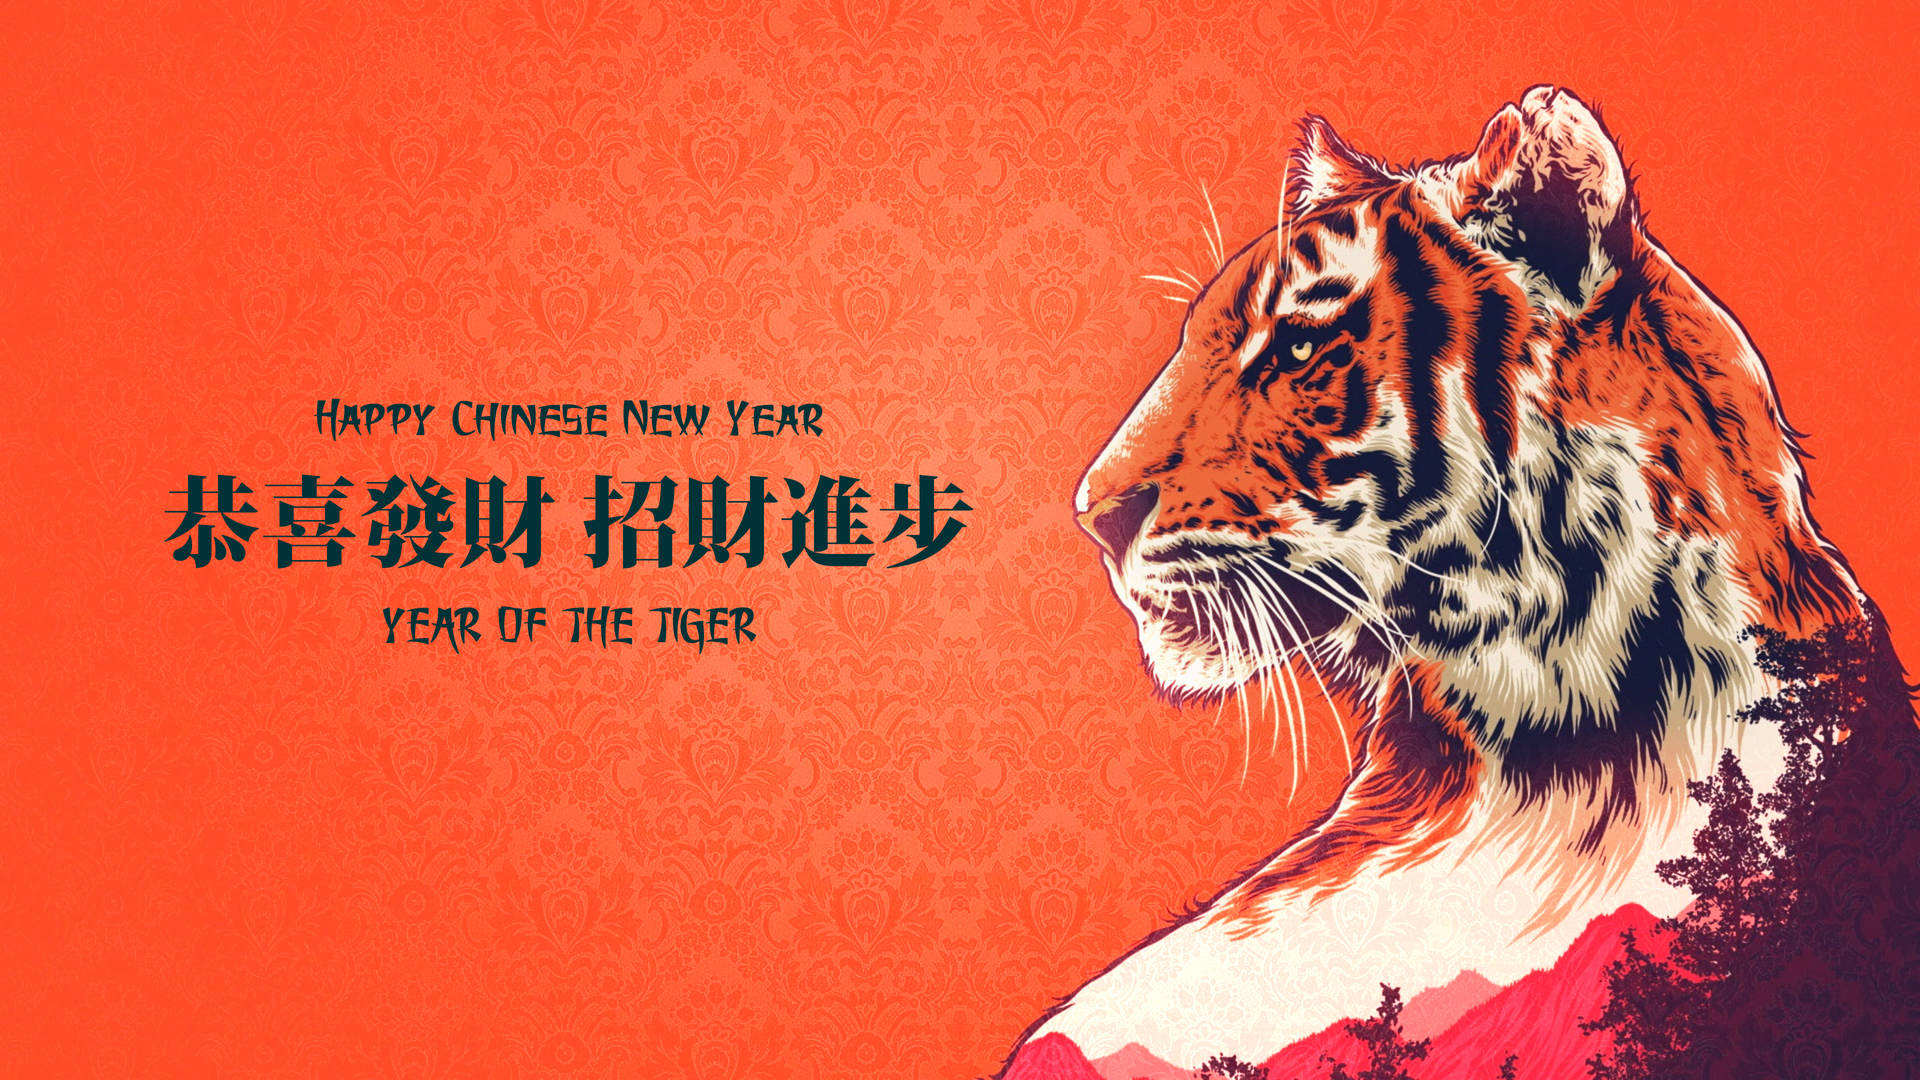 Free Chinese New Year Wallpaper Downloads, [200+] Chinese New Year  Wallpapers for FREE 